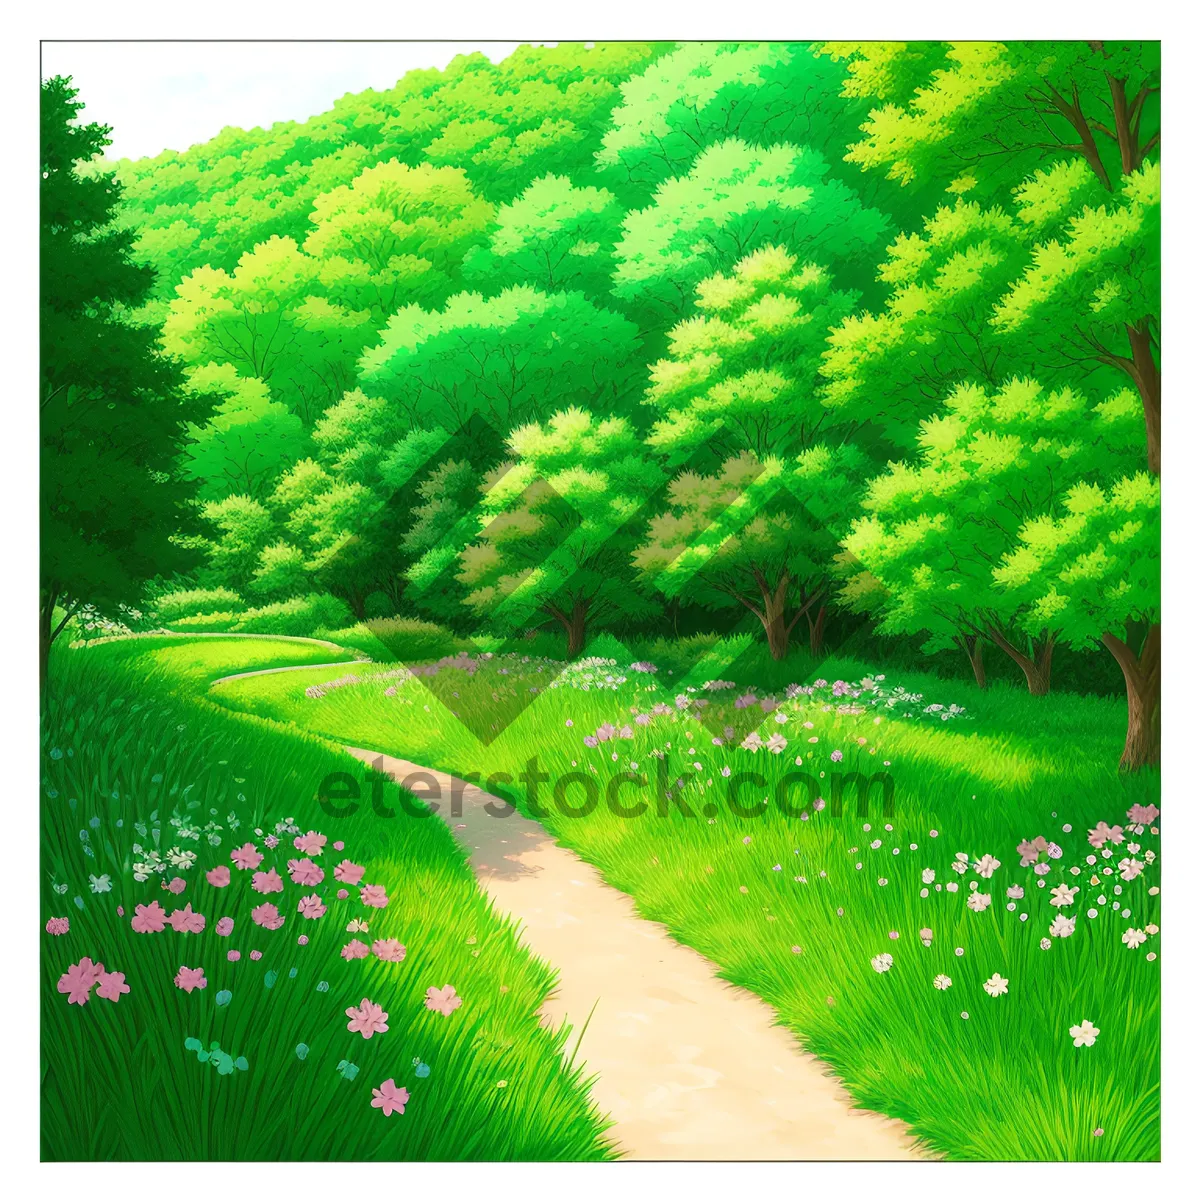 Picture of Lush Green Meadow Underneath Blue Sky